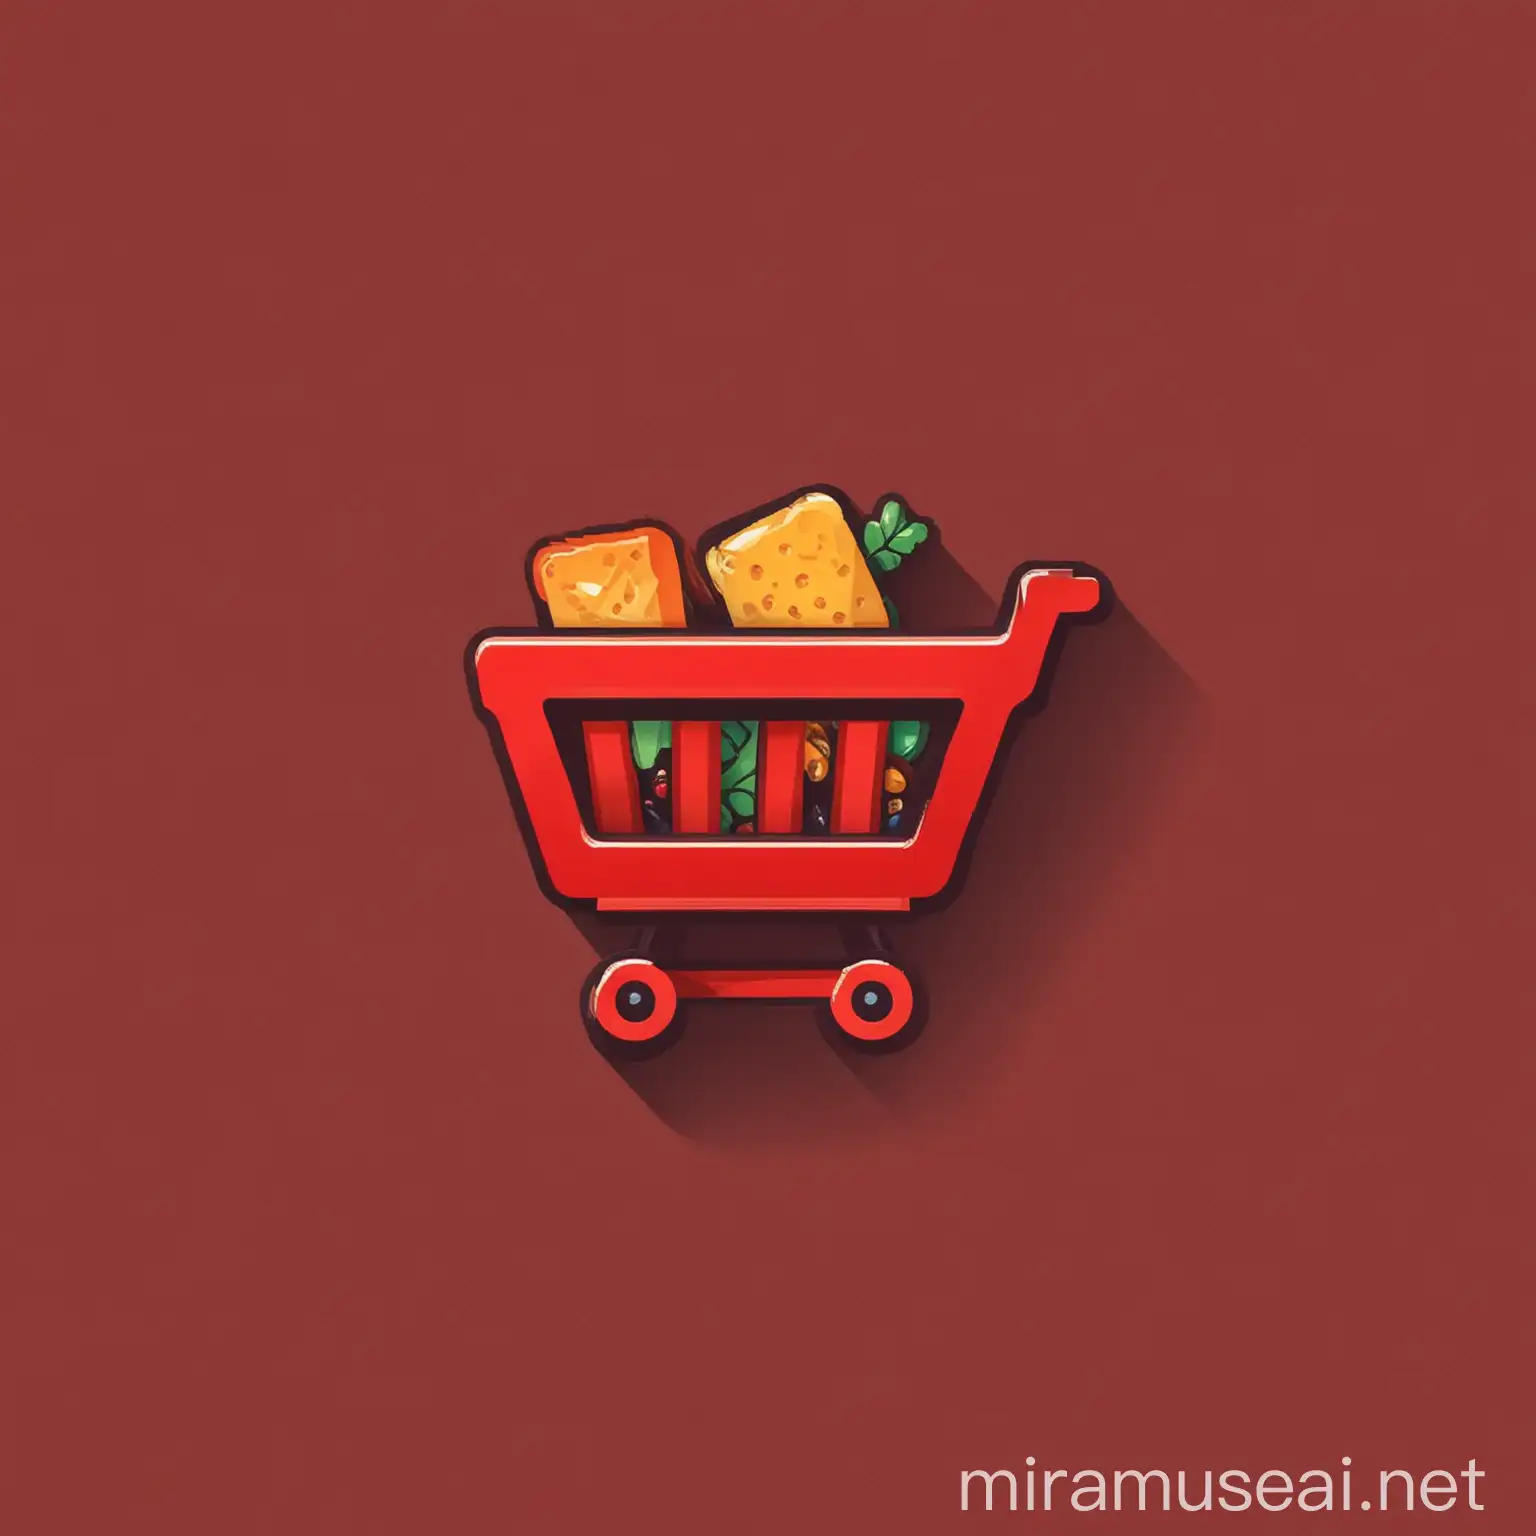 Red Shopping Cart Logo with Food Items